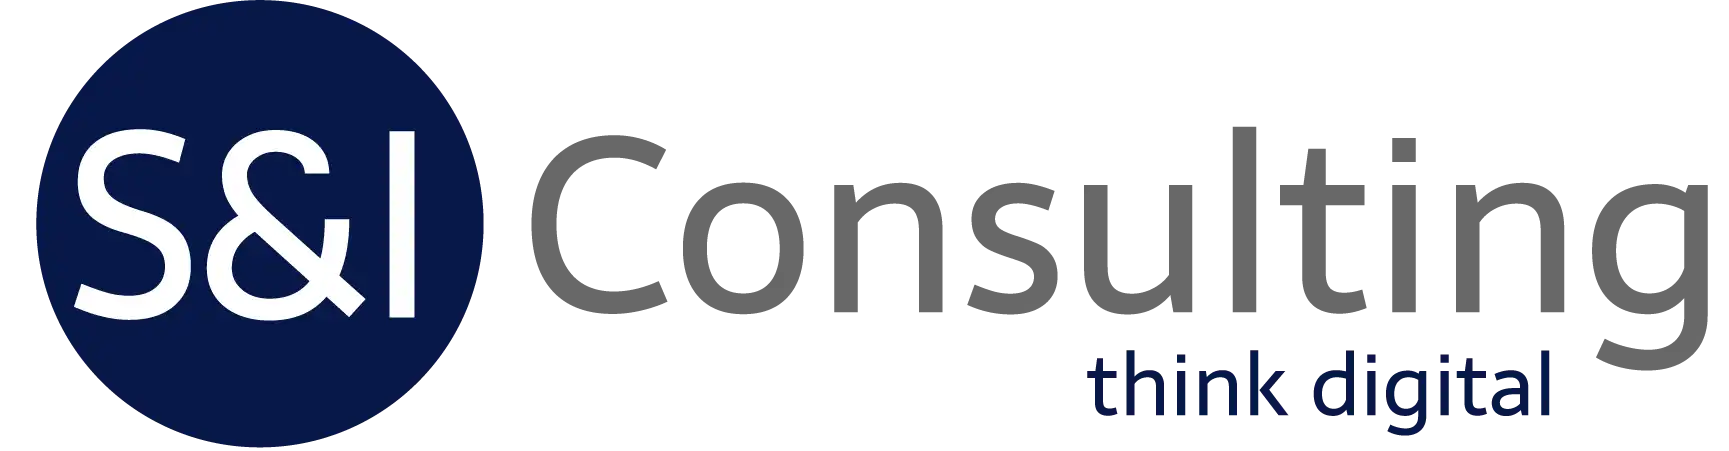 350_40_si-consulting_logo.webp